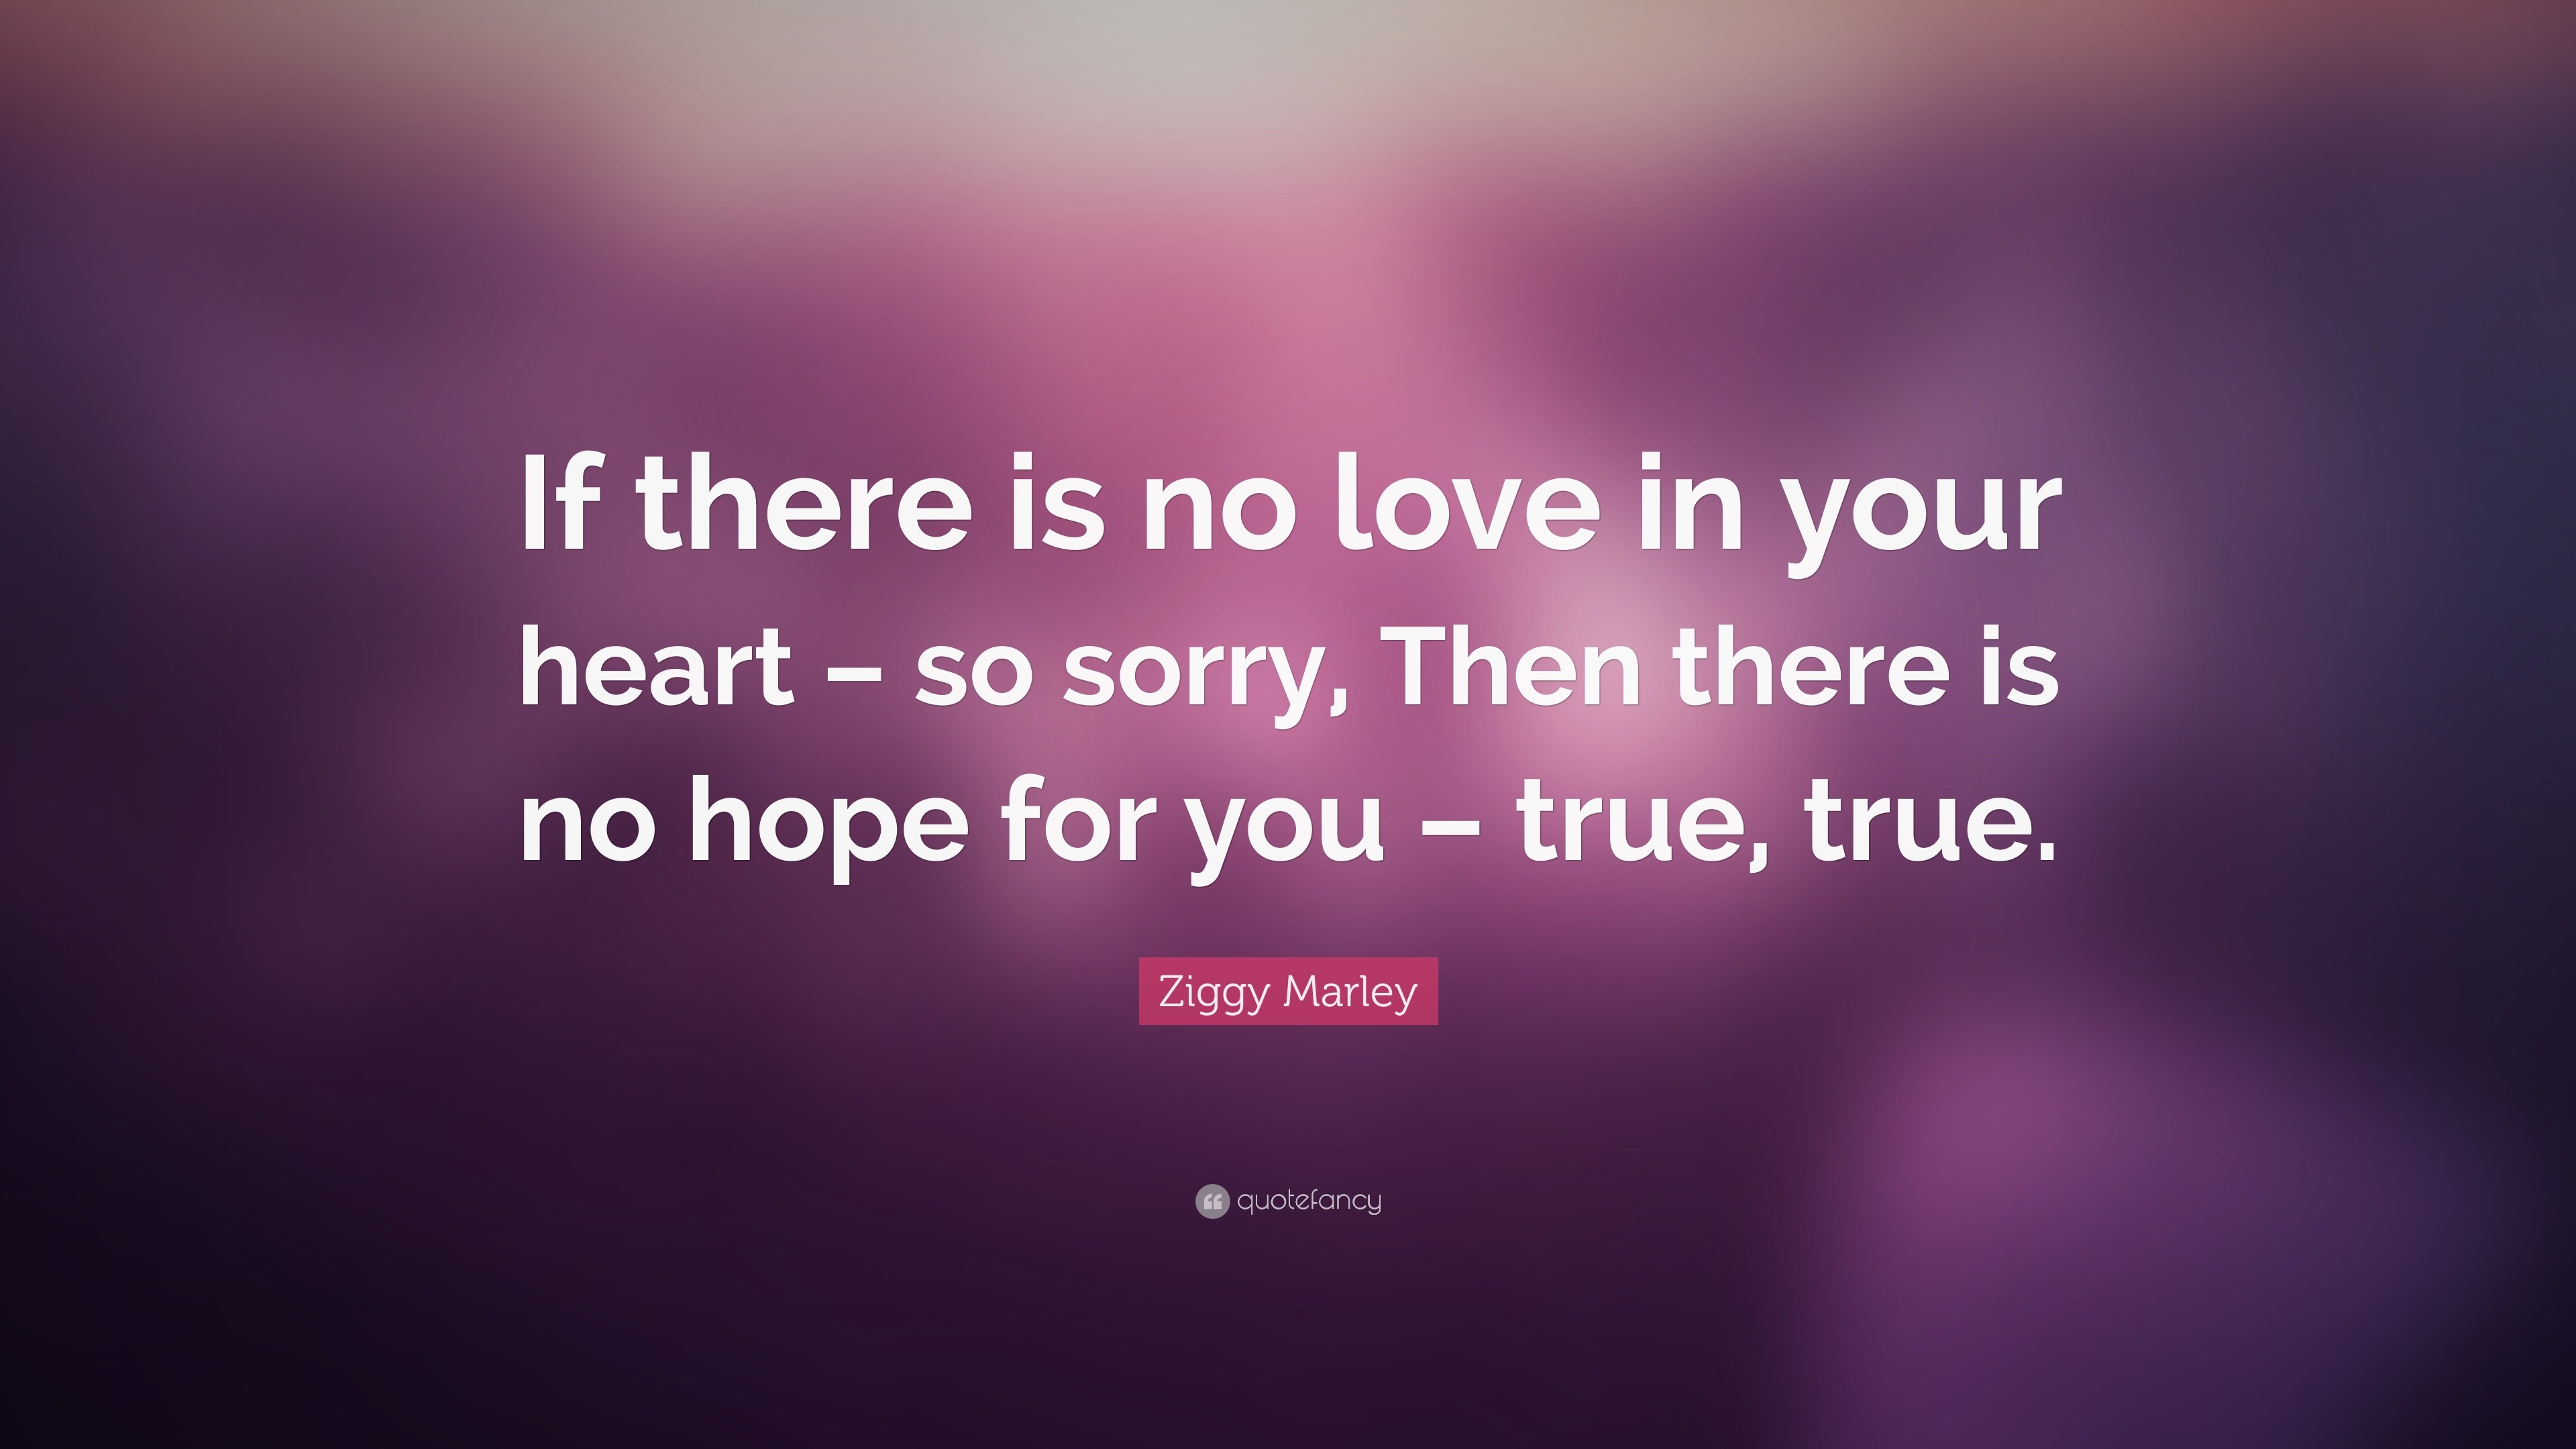 Ziggy Marley Quote If There Is No Love In Your Heart So Sorry Then There Is